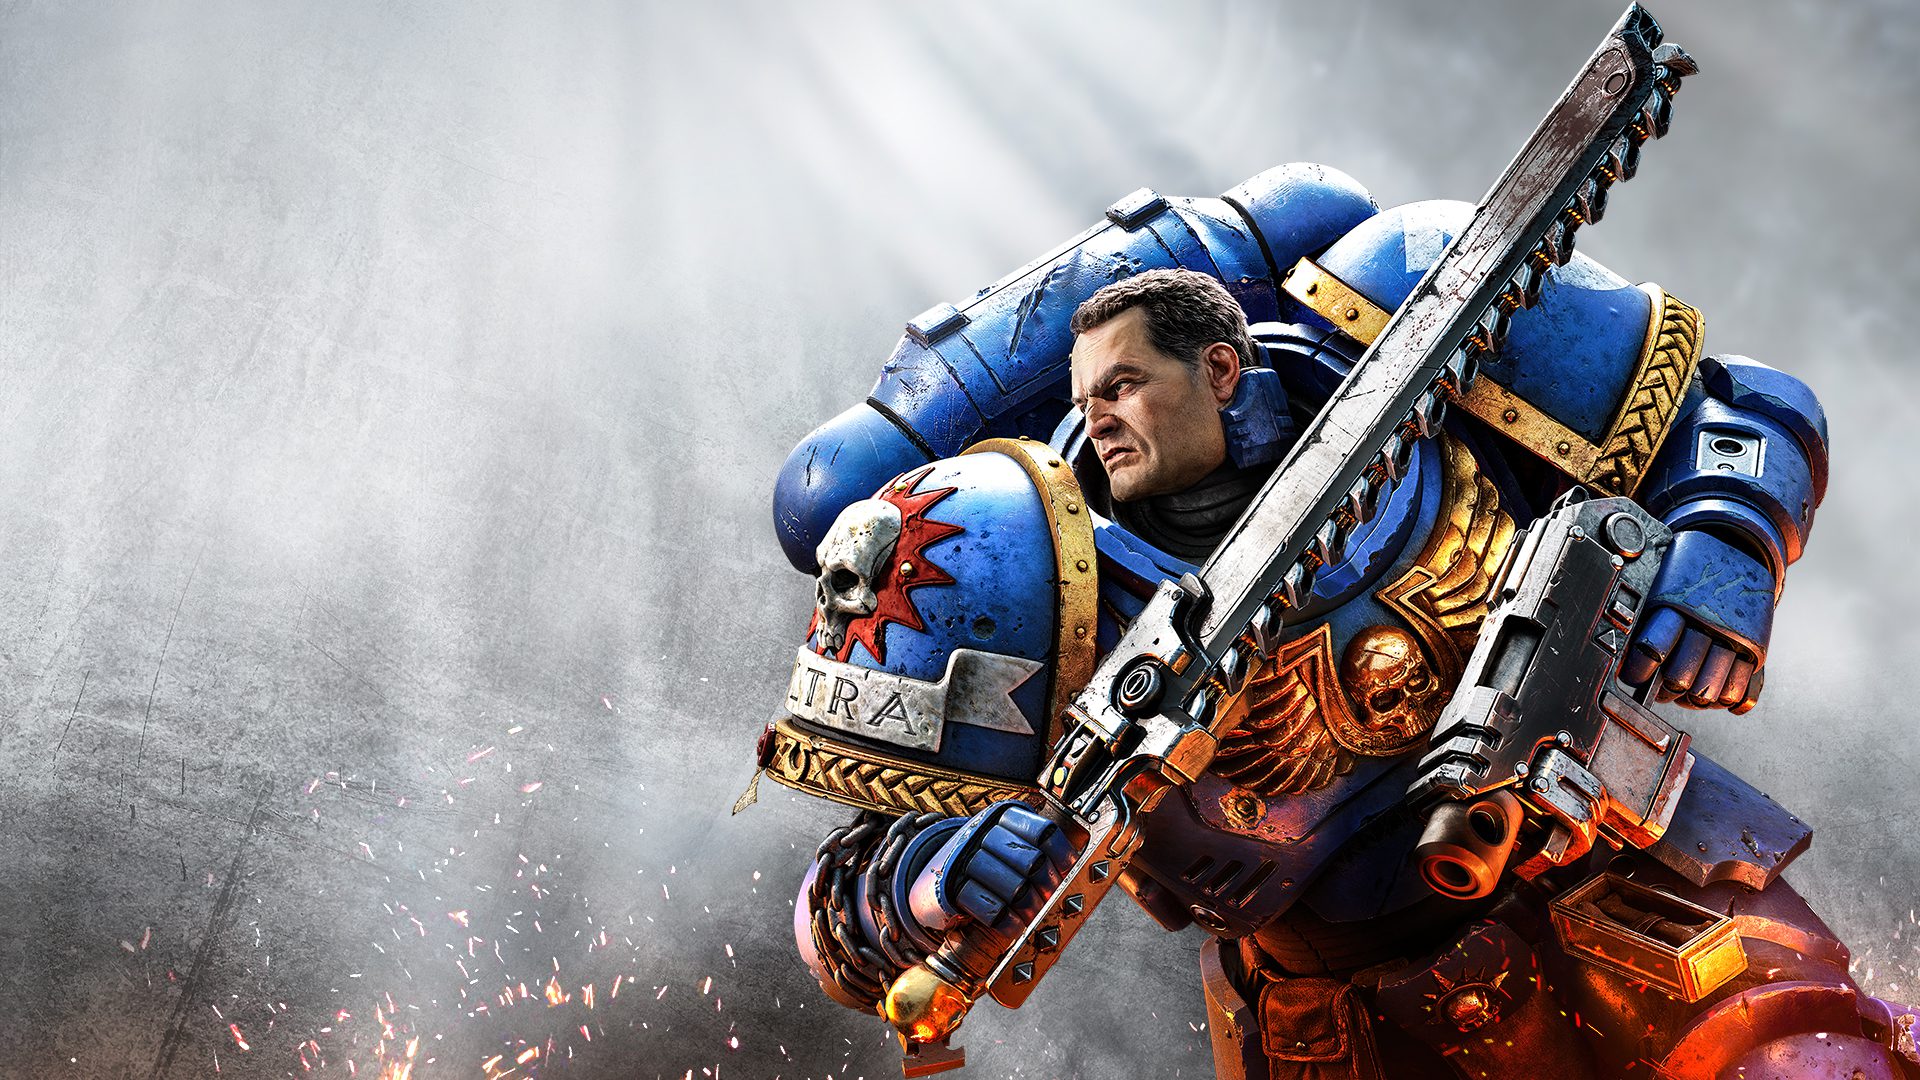 PvP multiplayer returns to Warhammer 40,000: Space Marine 2, alongside a new co-op mode